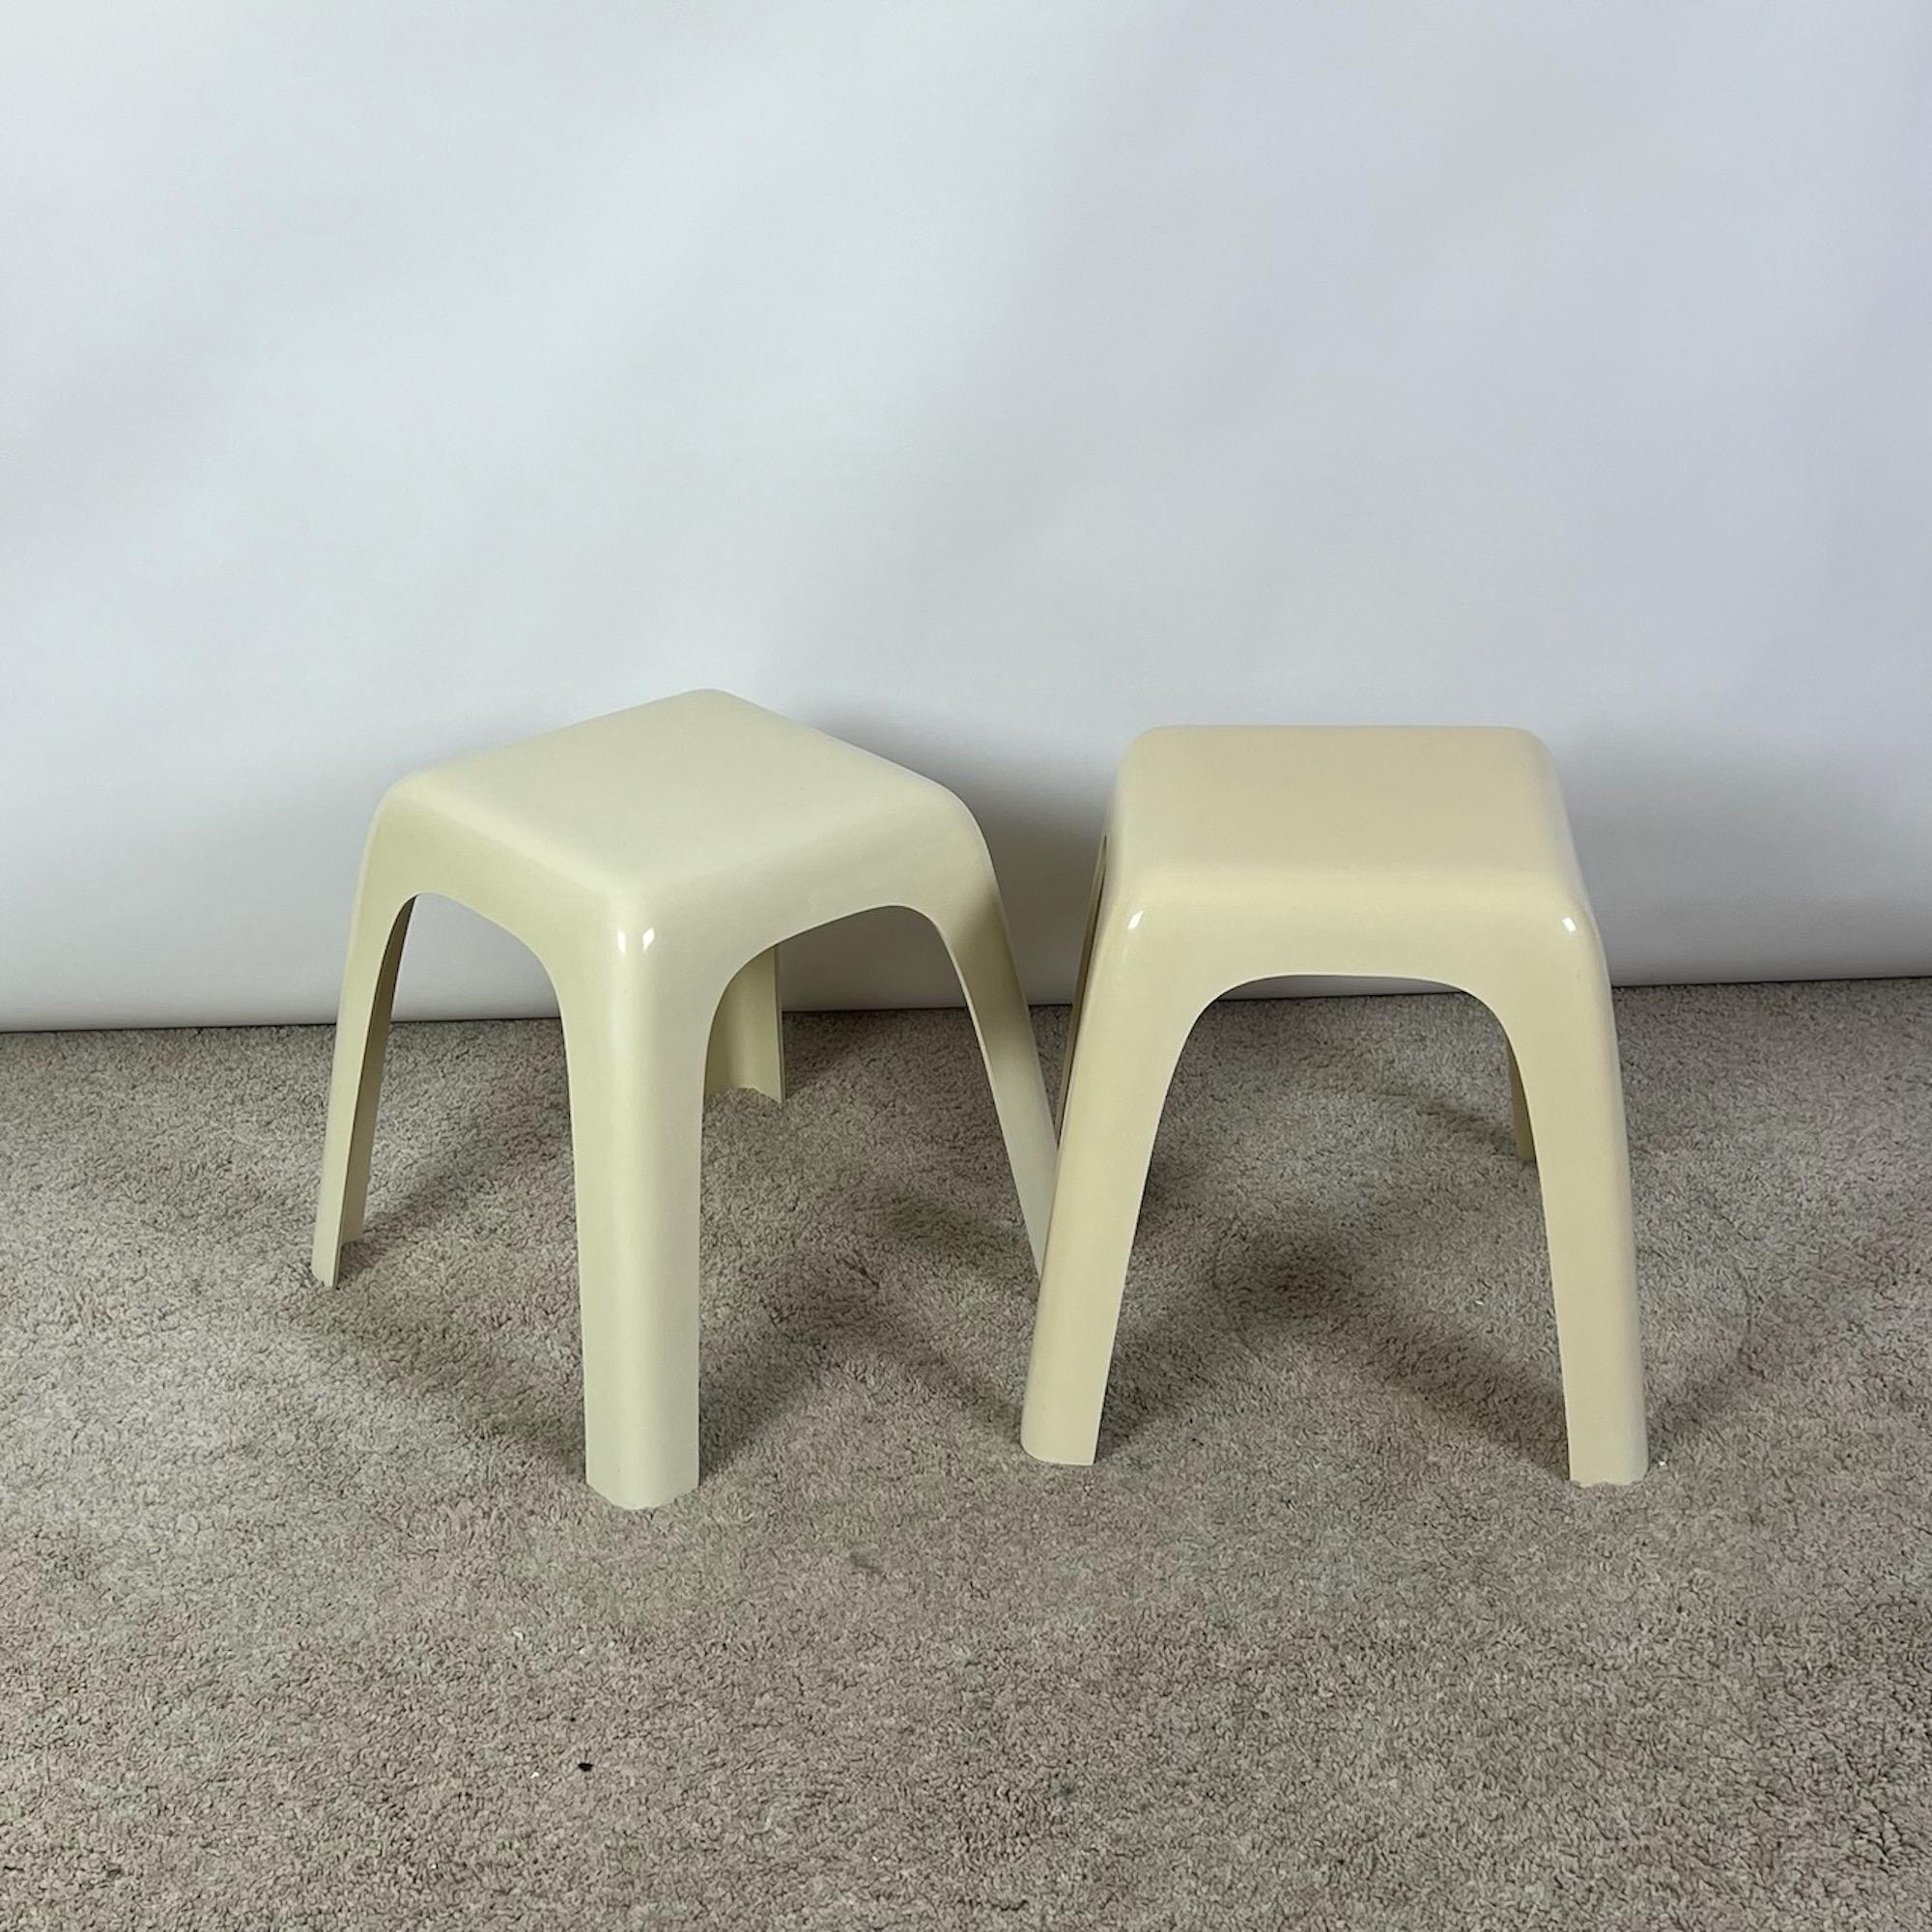 Set of tables / stools SMALL by Castiglioni Gaviraghi and Lanza for Valenti, 80s For Sale 1